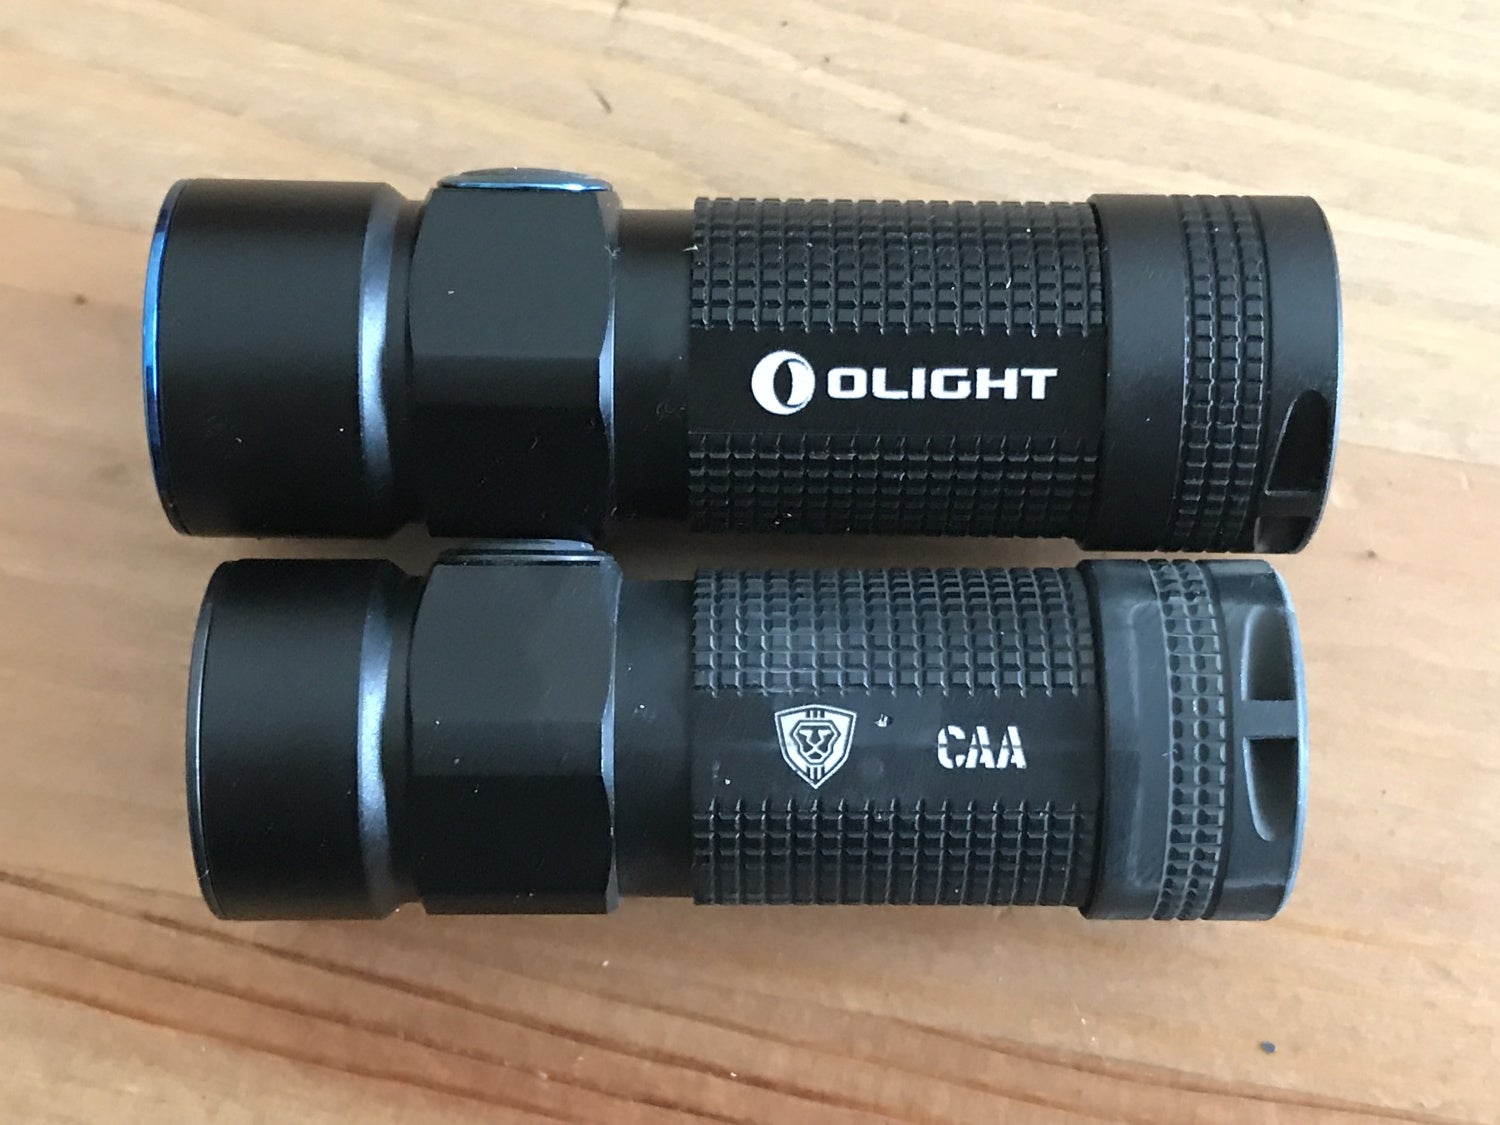 Olight S1R above and CAA S1 below